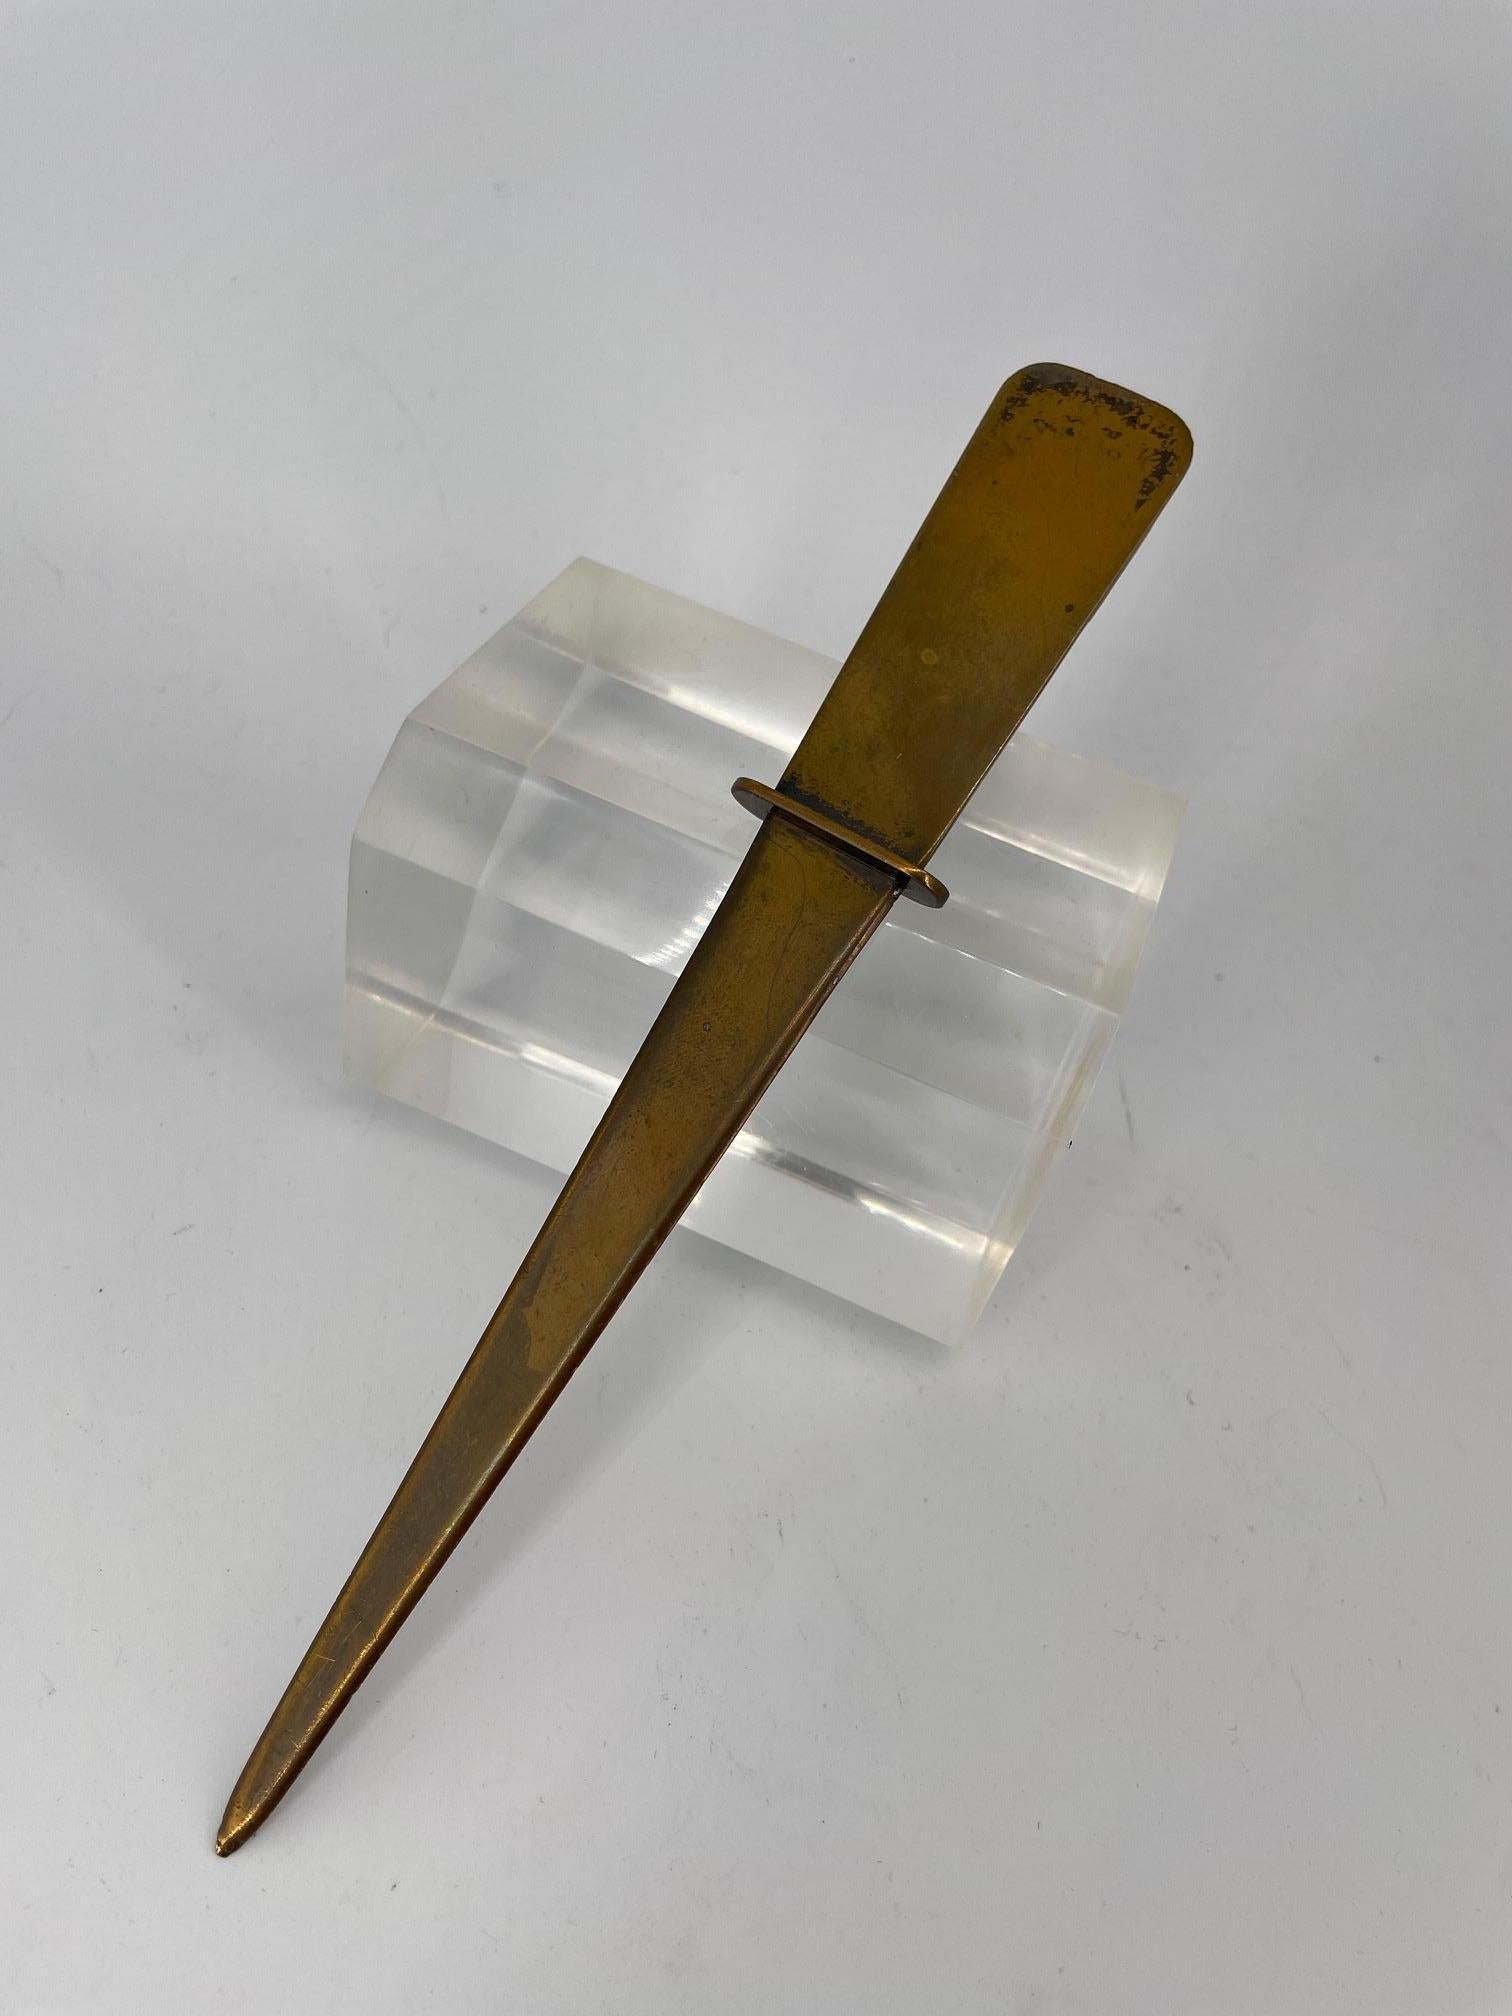 Modernist Abstract Sword Copper Plated Brass Letter Opener like Carl Aubock For Sale 2